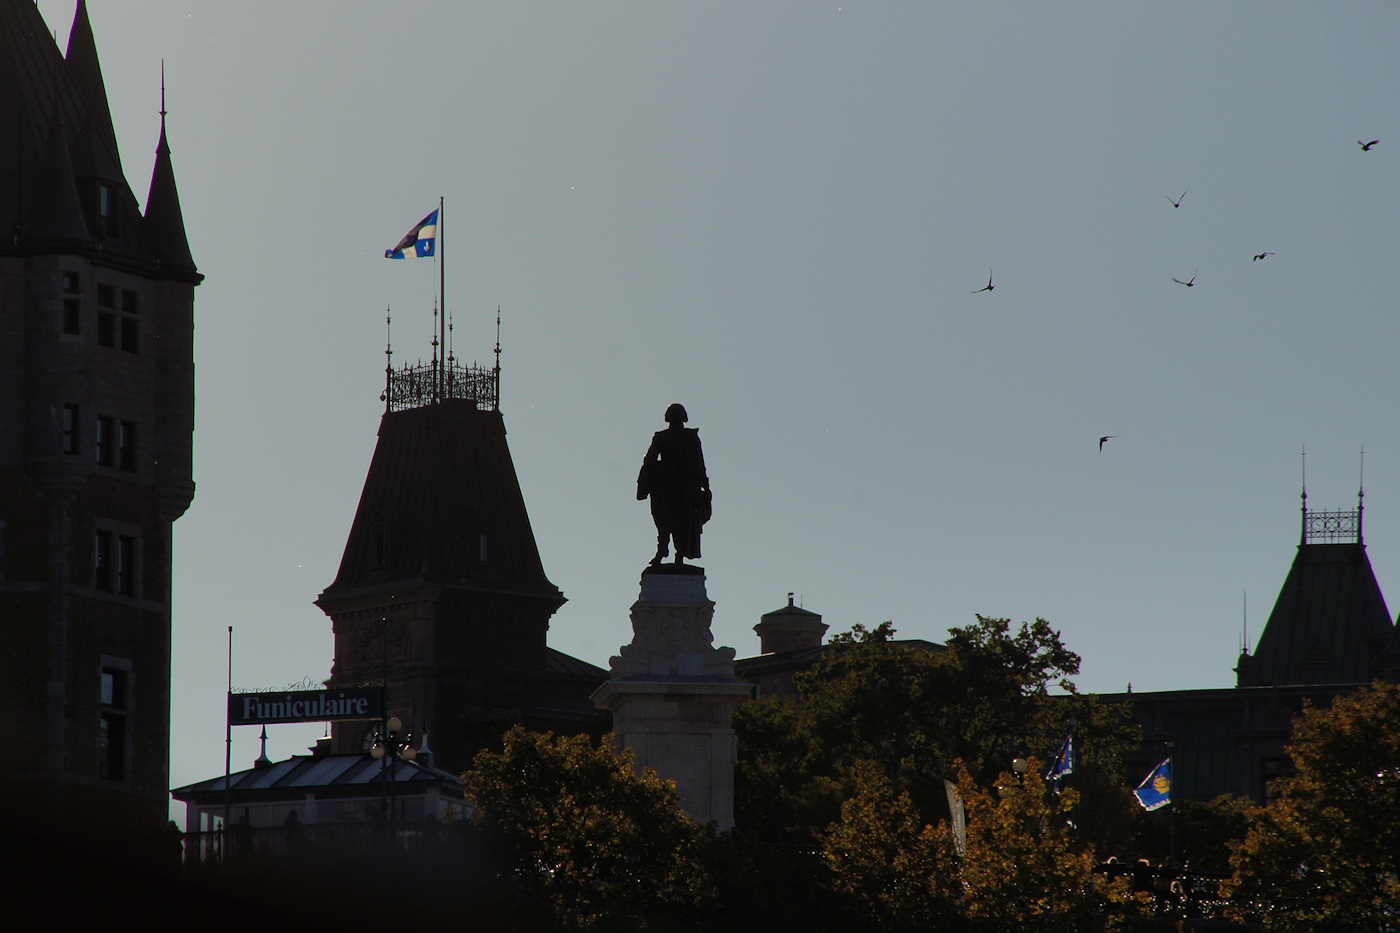 Upper town Quebec roofs and Champlain statue